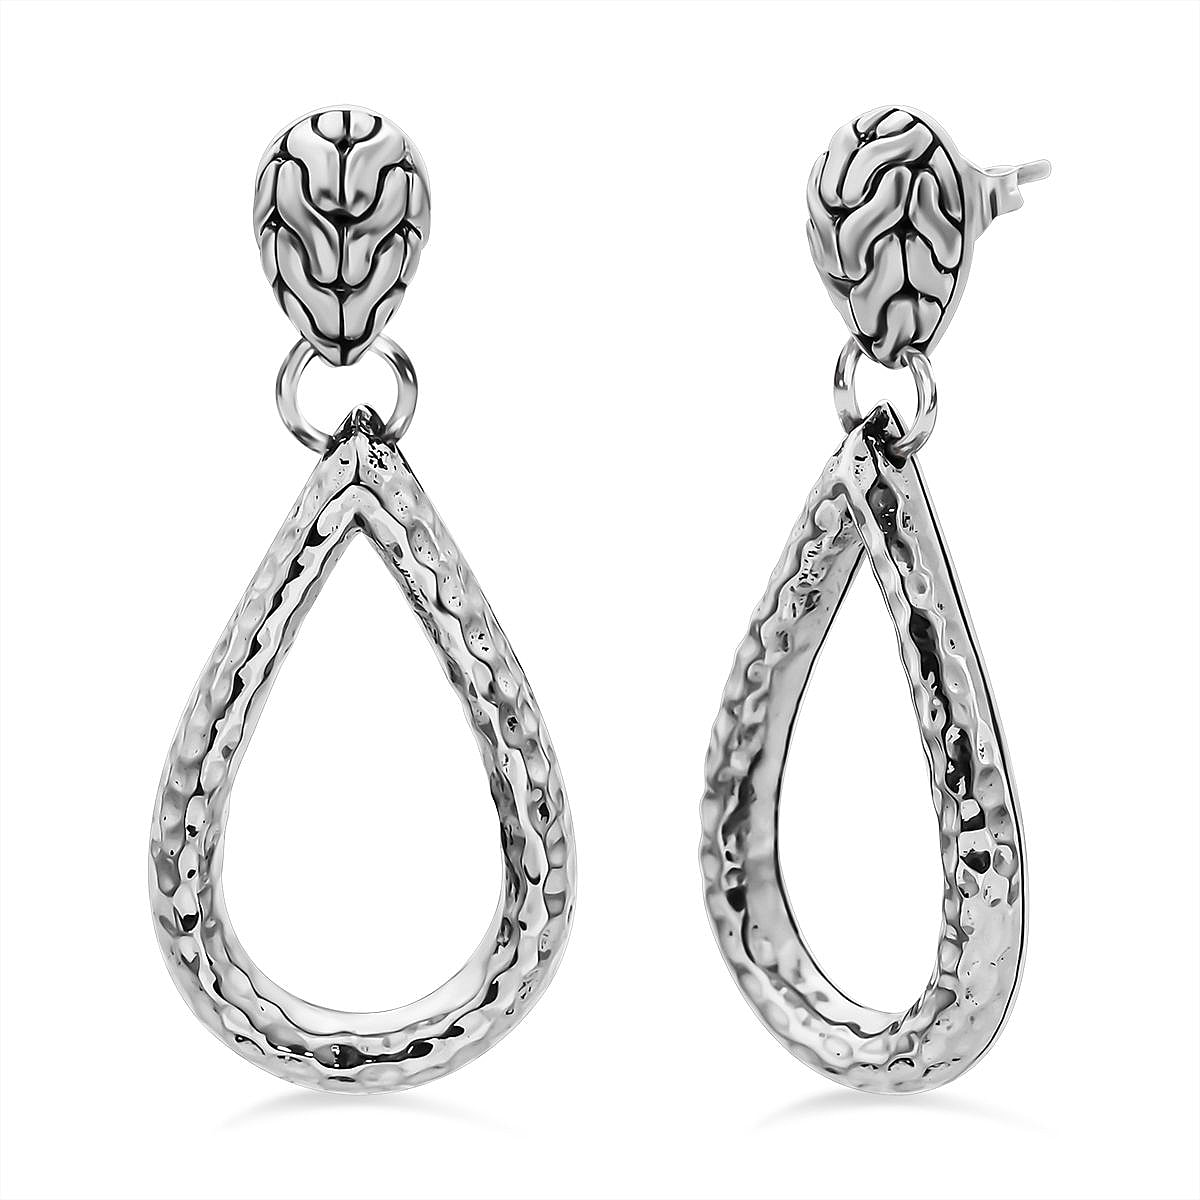 Royal Bali Collection- Sterling Silver Earrings, Silver Wt. 10.95 Gms